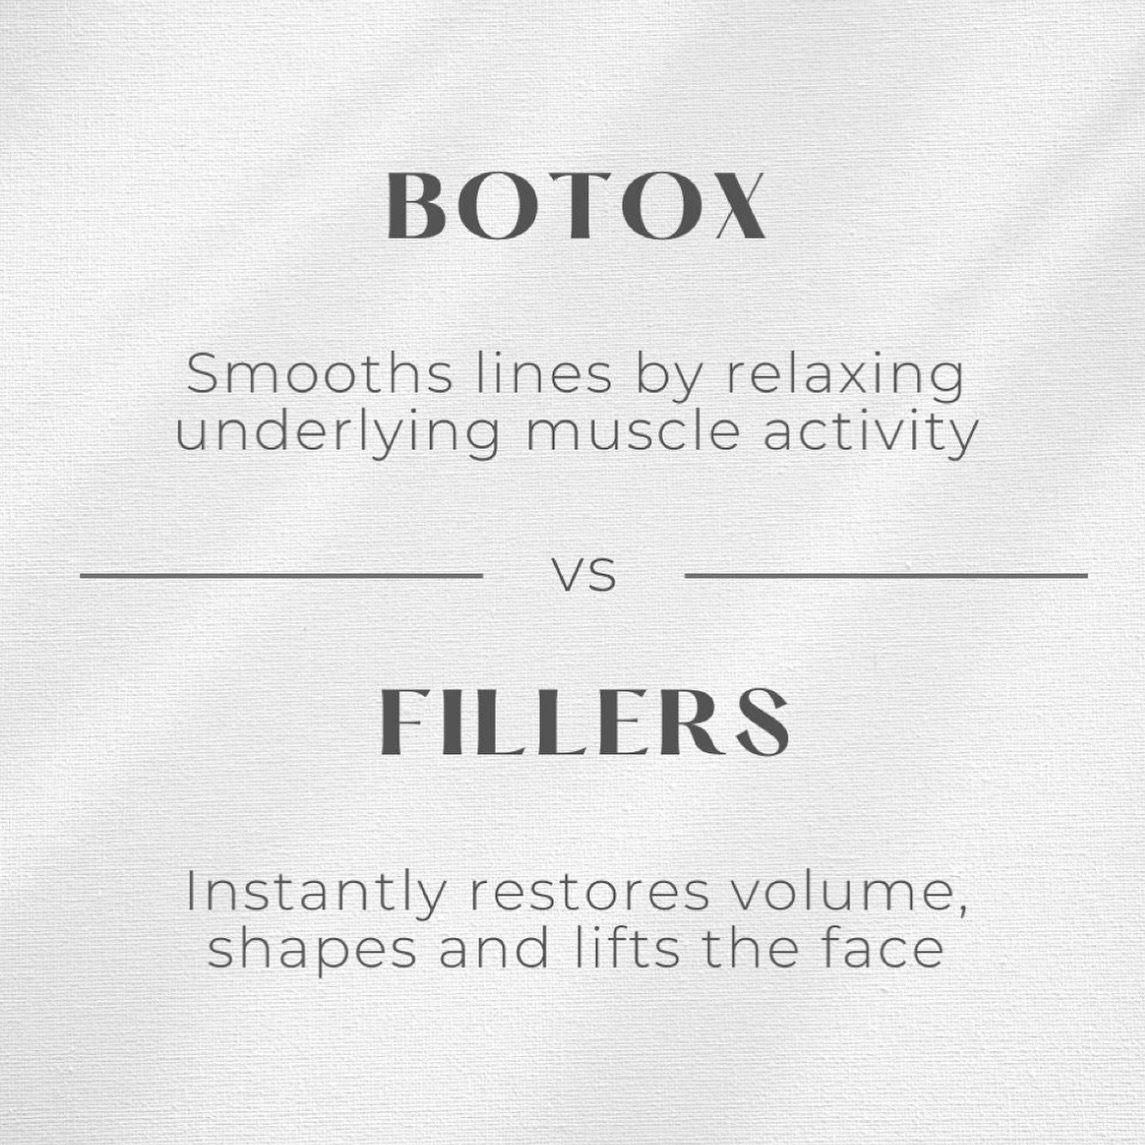 Do you understand the distinction between Botox and Fillers?

Botox is an injectable treatment, known as a neurotoxin, used to soften wrinkles and lines. It works by blocking nerve signals in the targeted muscle, preventing it from moving and causing